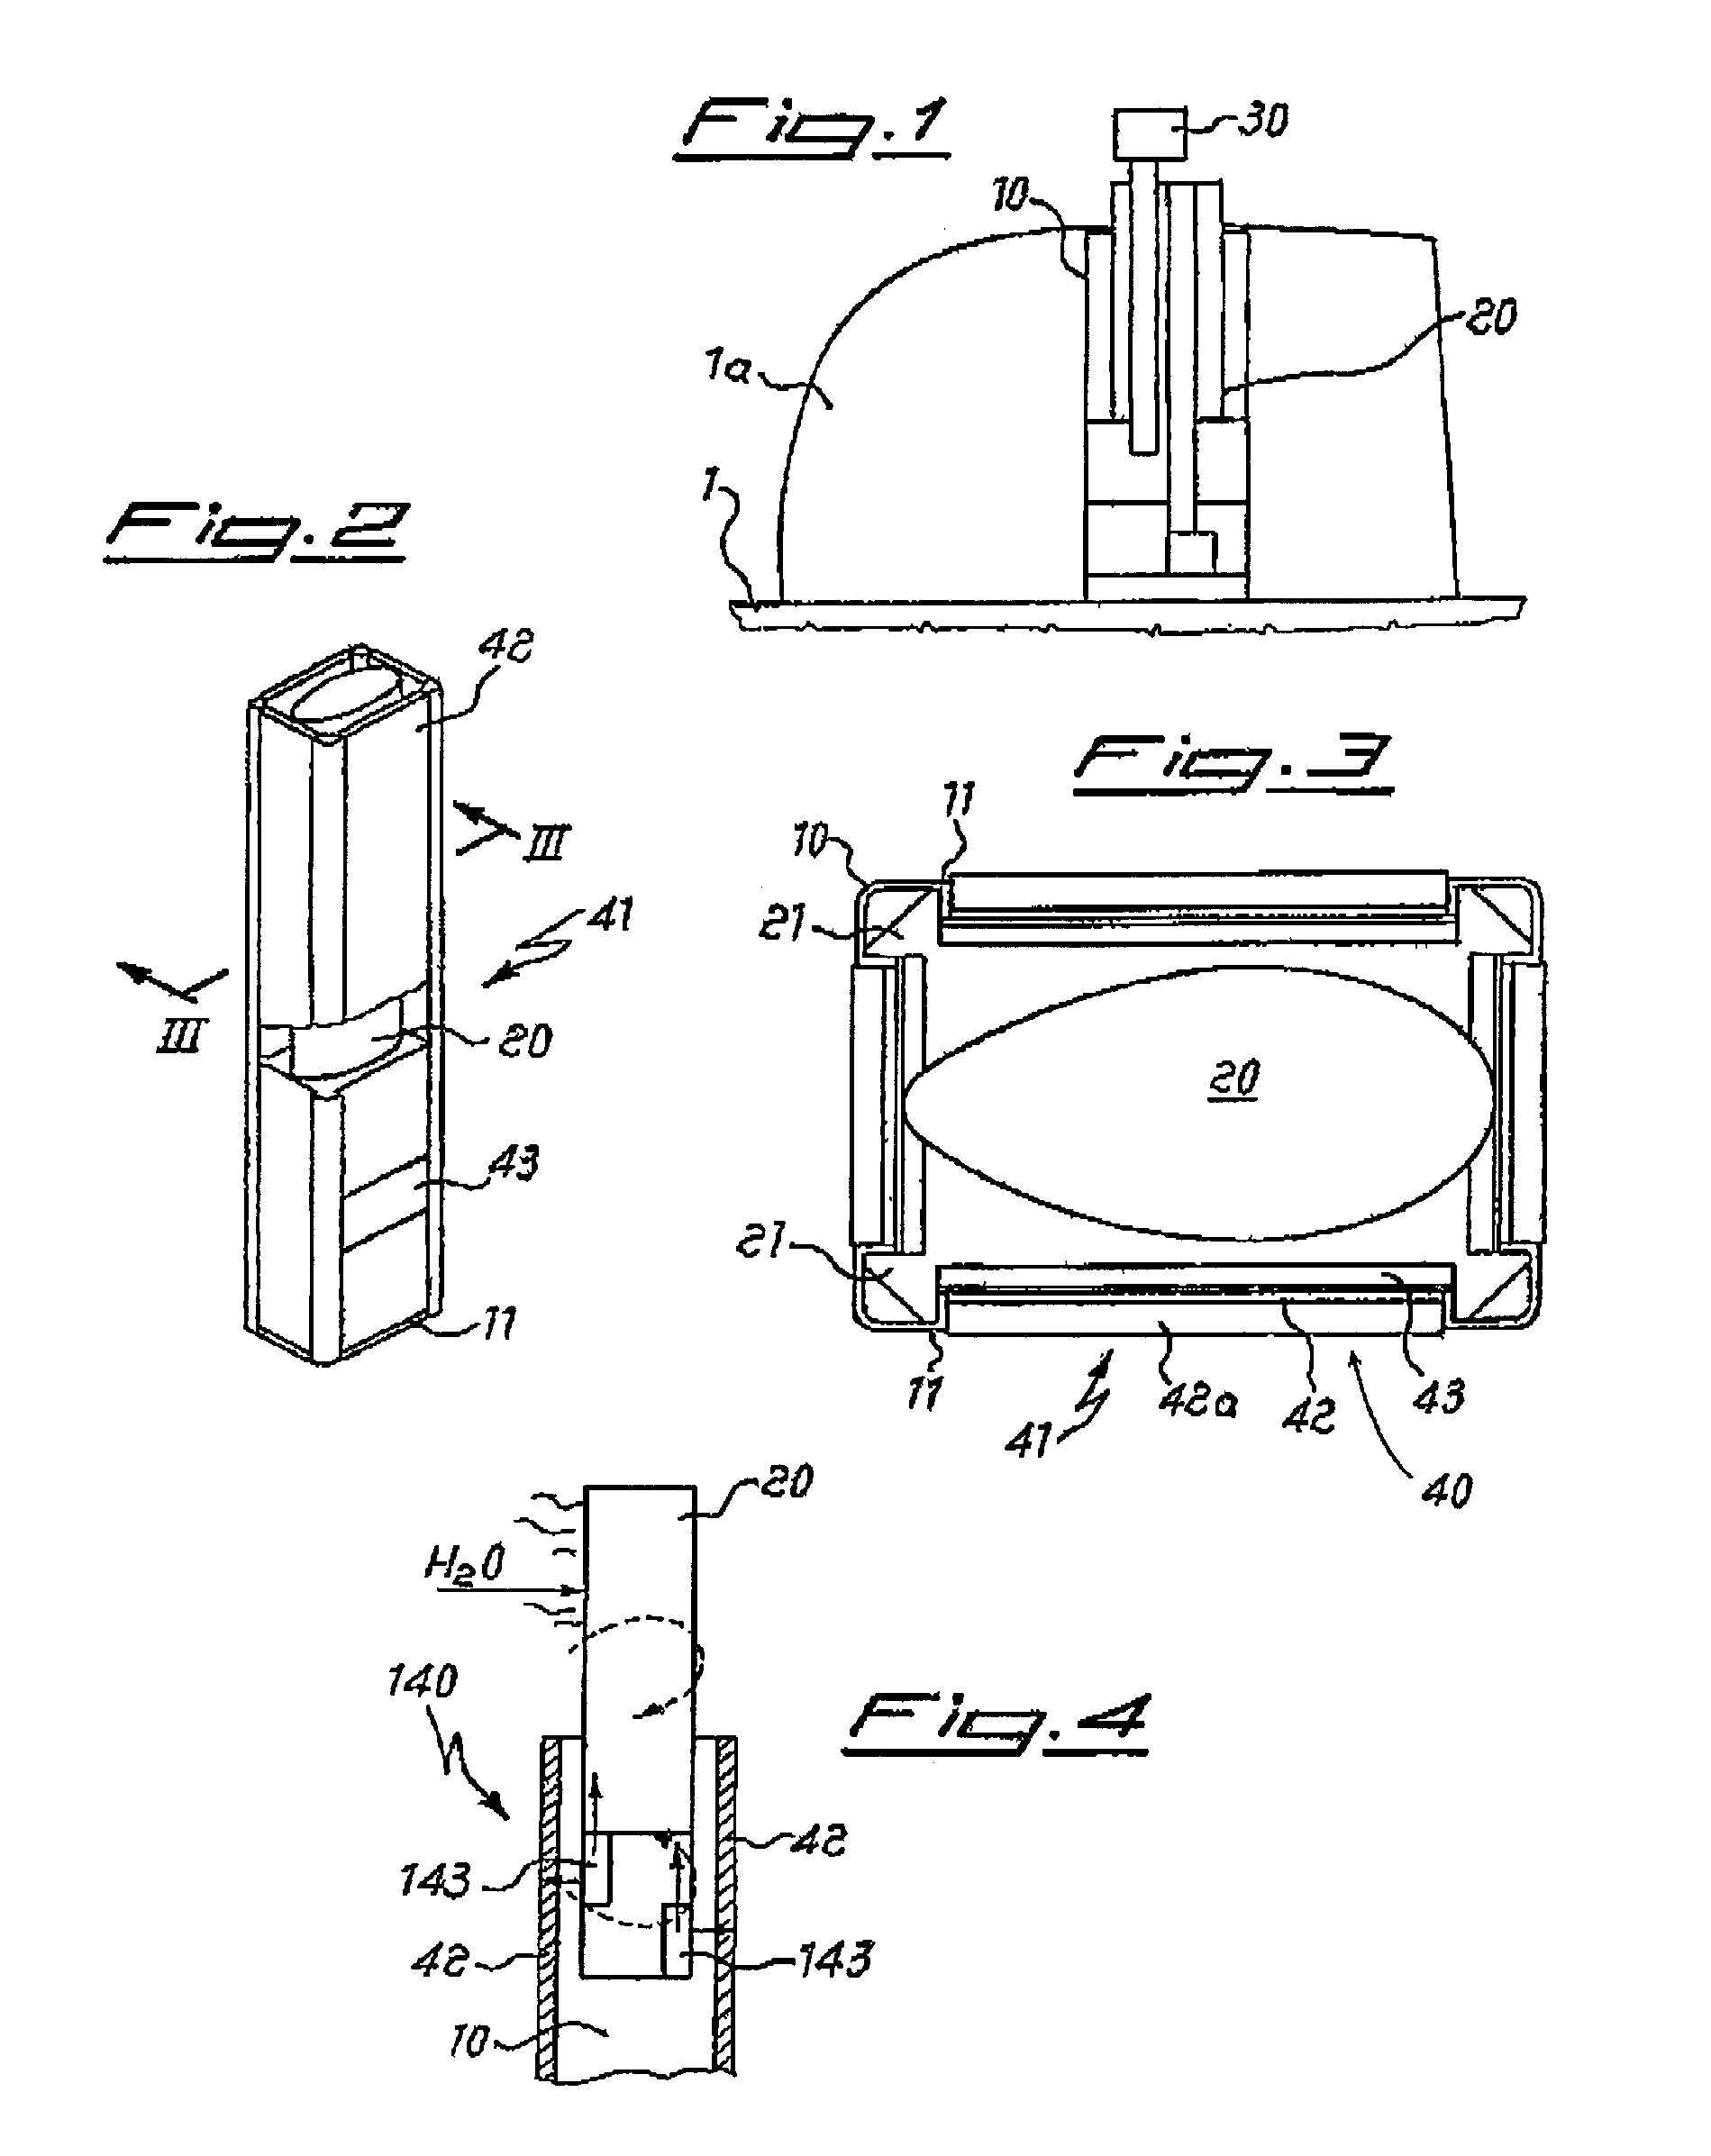 Linear-motor apparatus for moving sensor-support tubes of submarines